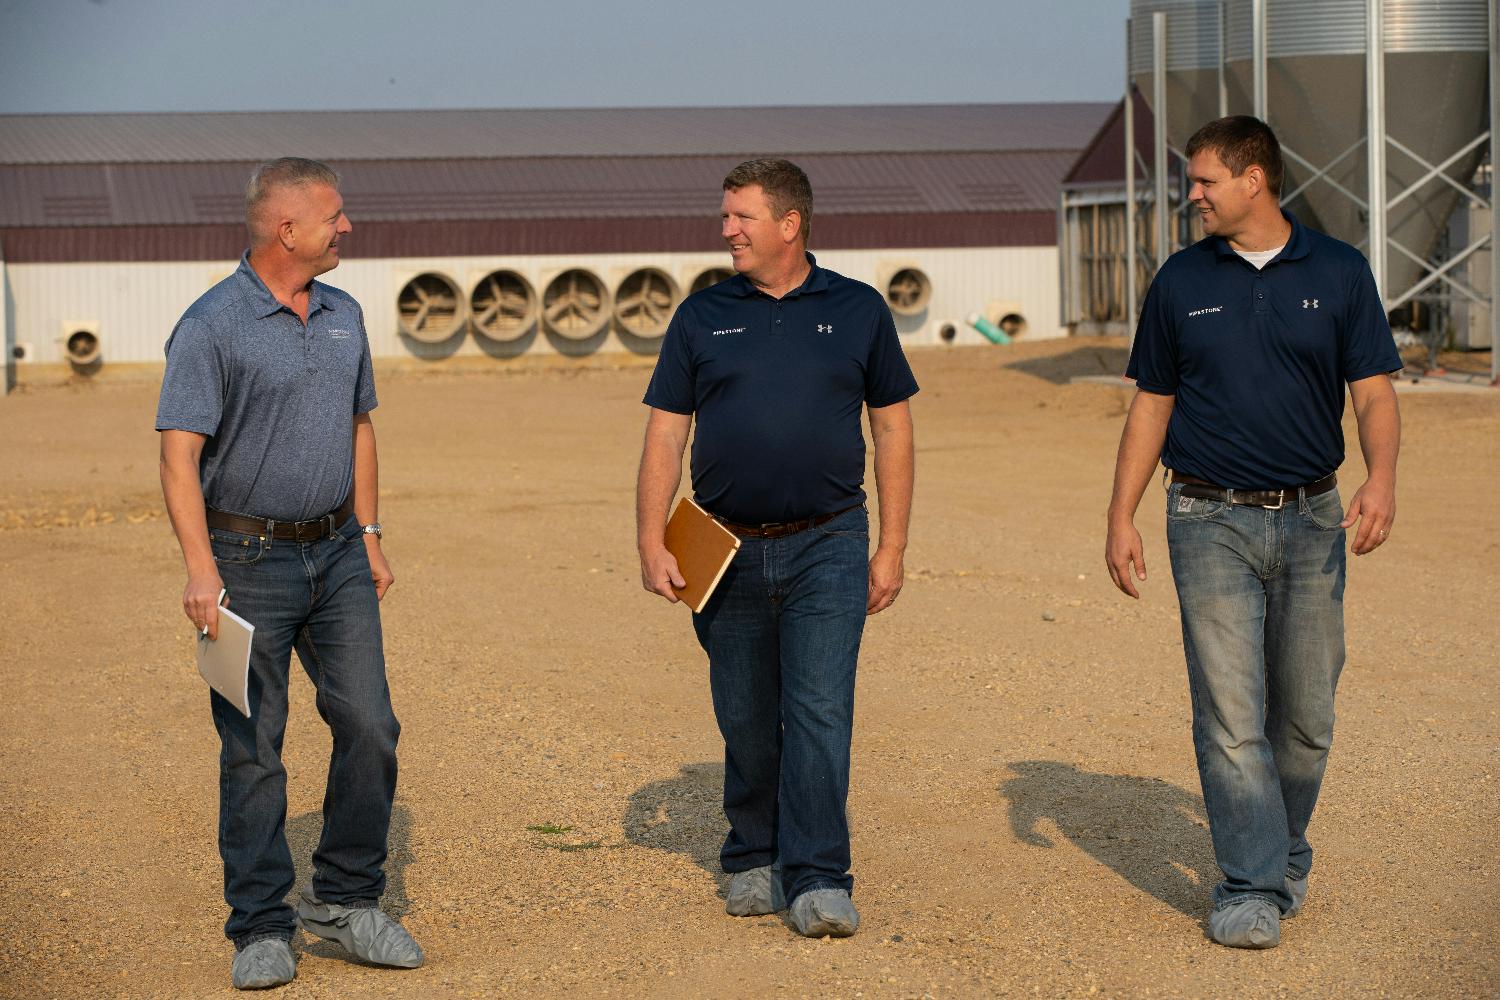 Veterinarians Dr.'s Wayne, Williams, and VanderPoel spend their day on farm helping family farmers raise healthy pigs.